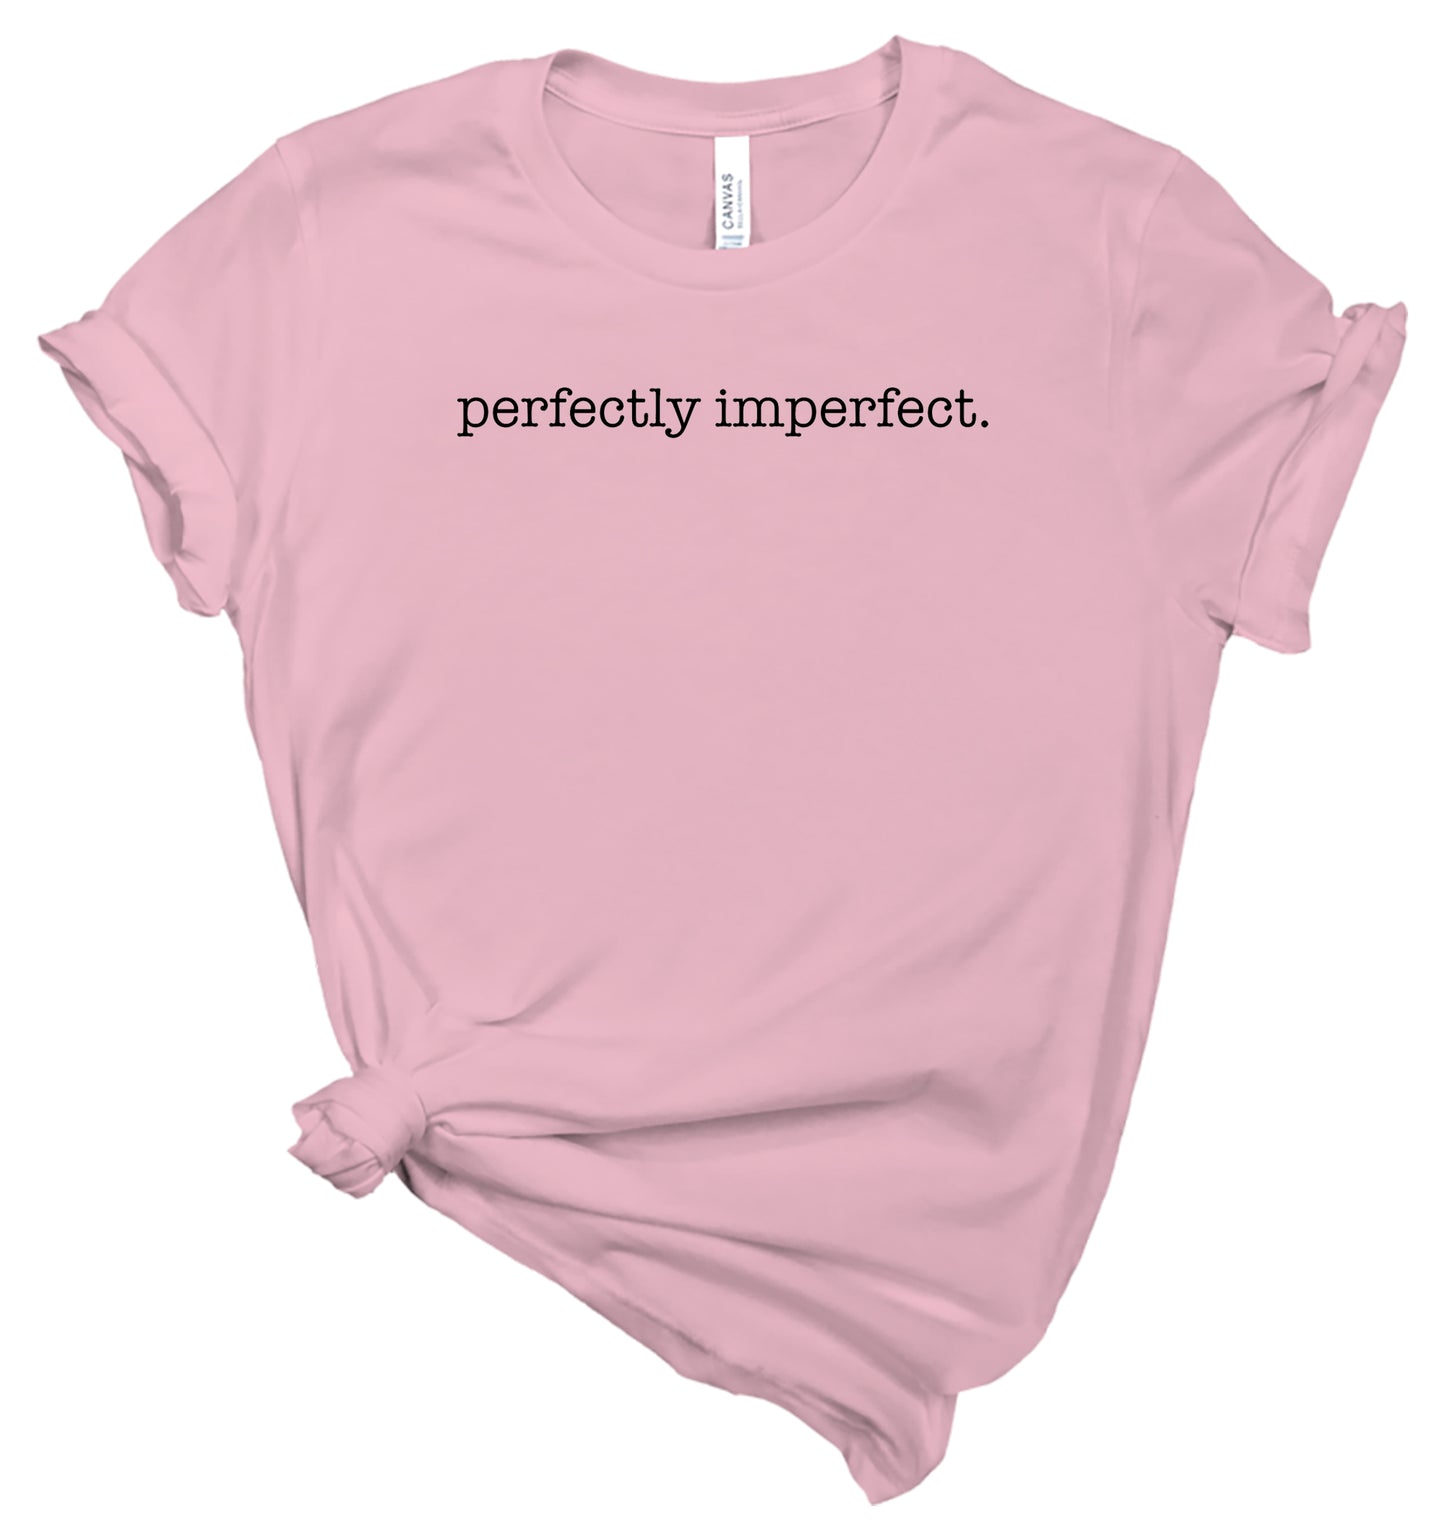 perfectly imperfect - Affirmation Shirt - T-Shirt